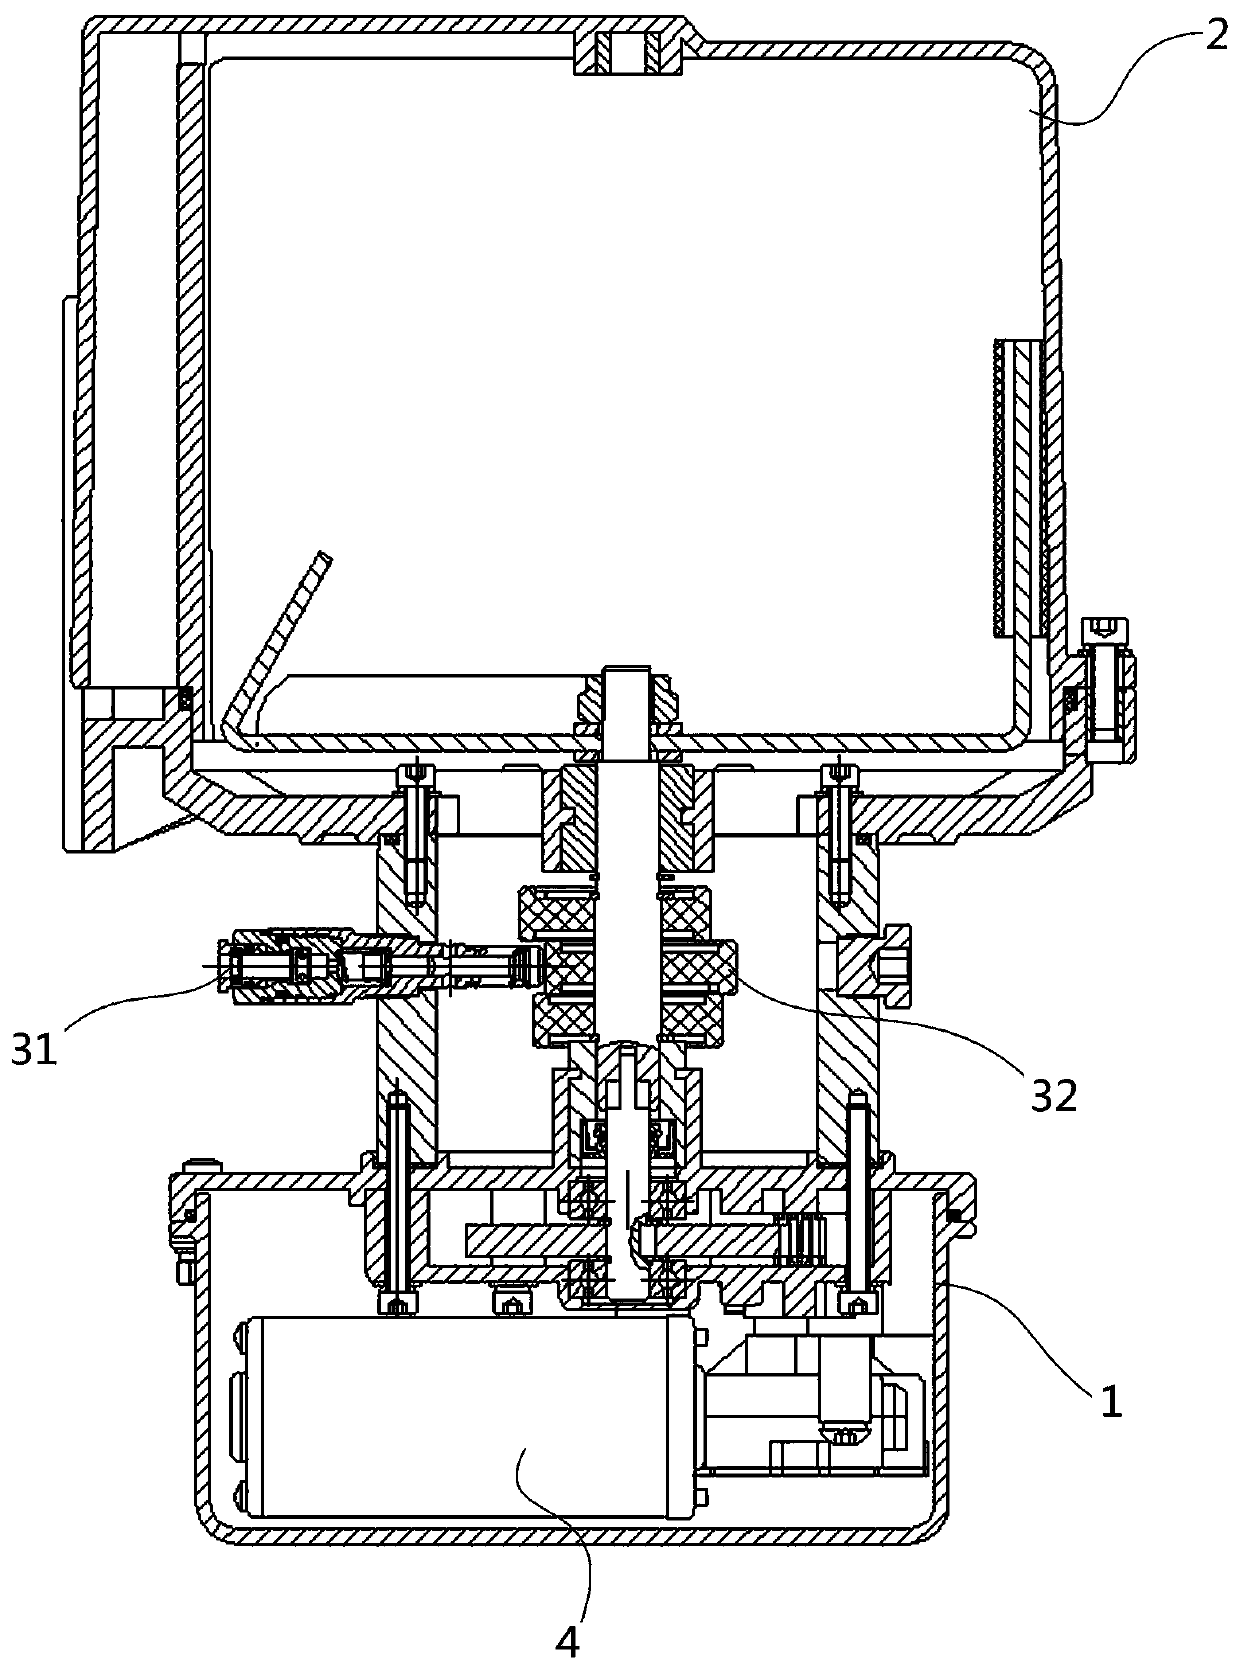 Plunger assembly, lubricating pump, plunger and plunger machining method